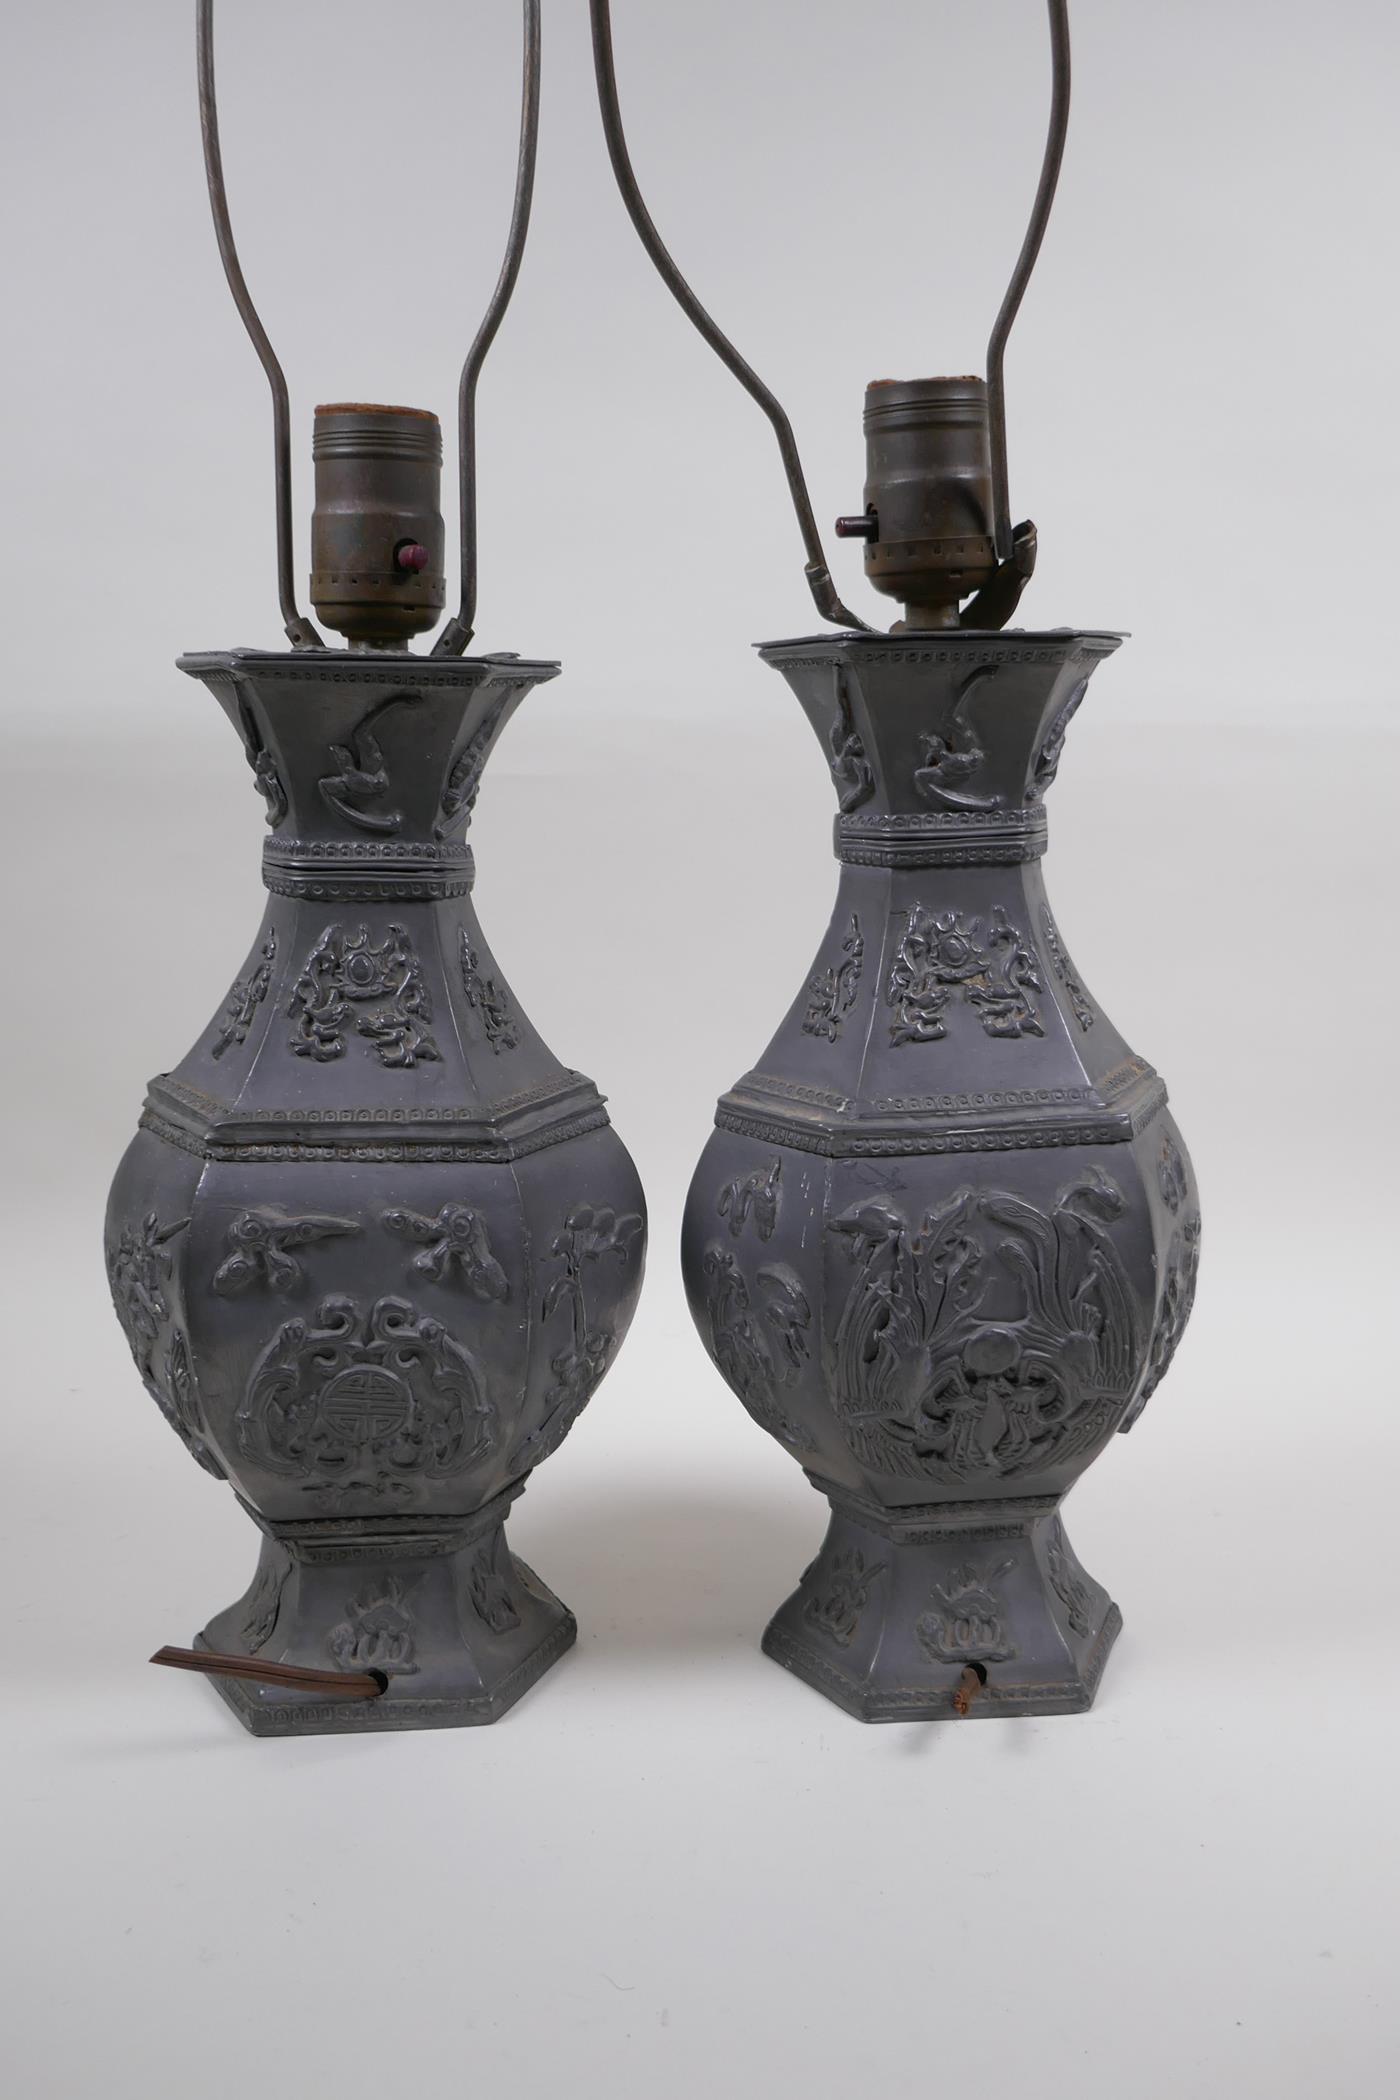 A pair of Chinese pewter lamps decorated with mythical creatures and auspicious symbols, 35cm high - Image 3 of 4